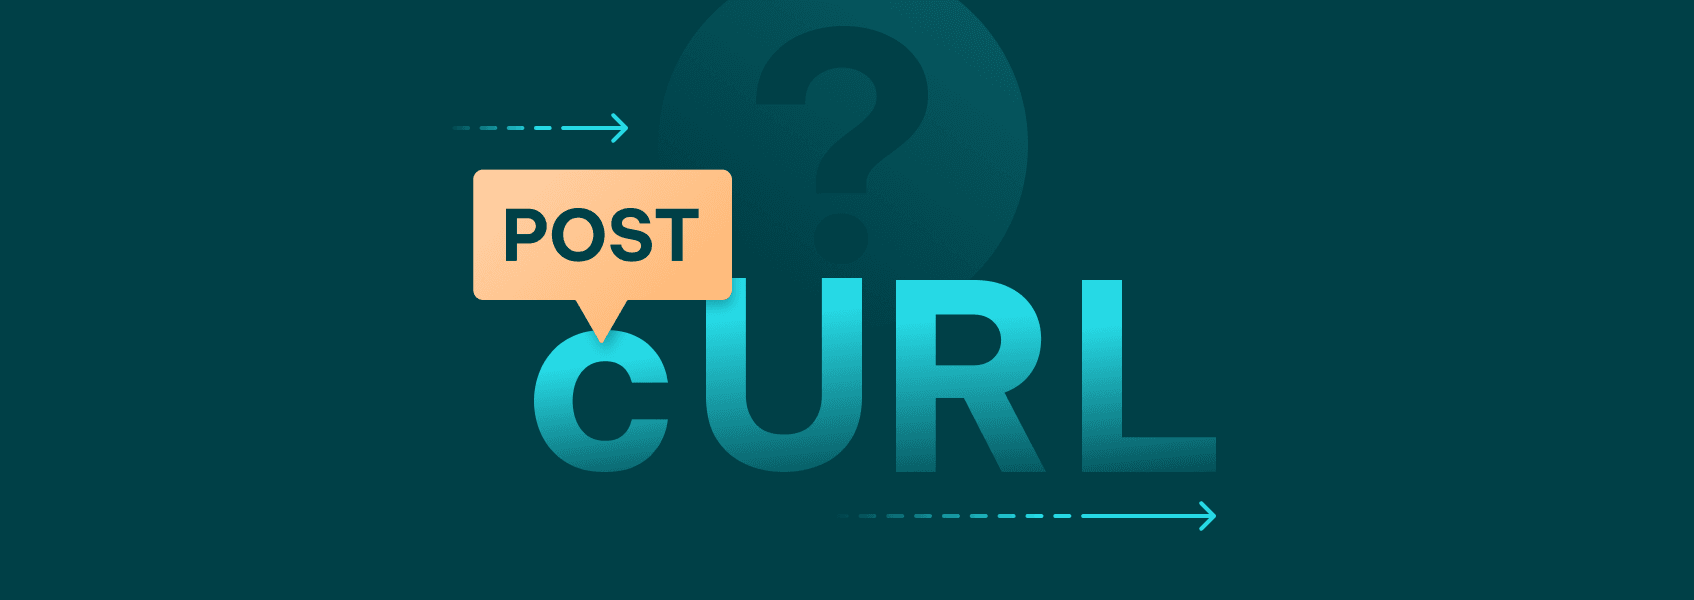 How to Send a cURL POST Request